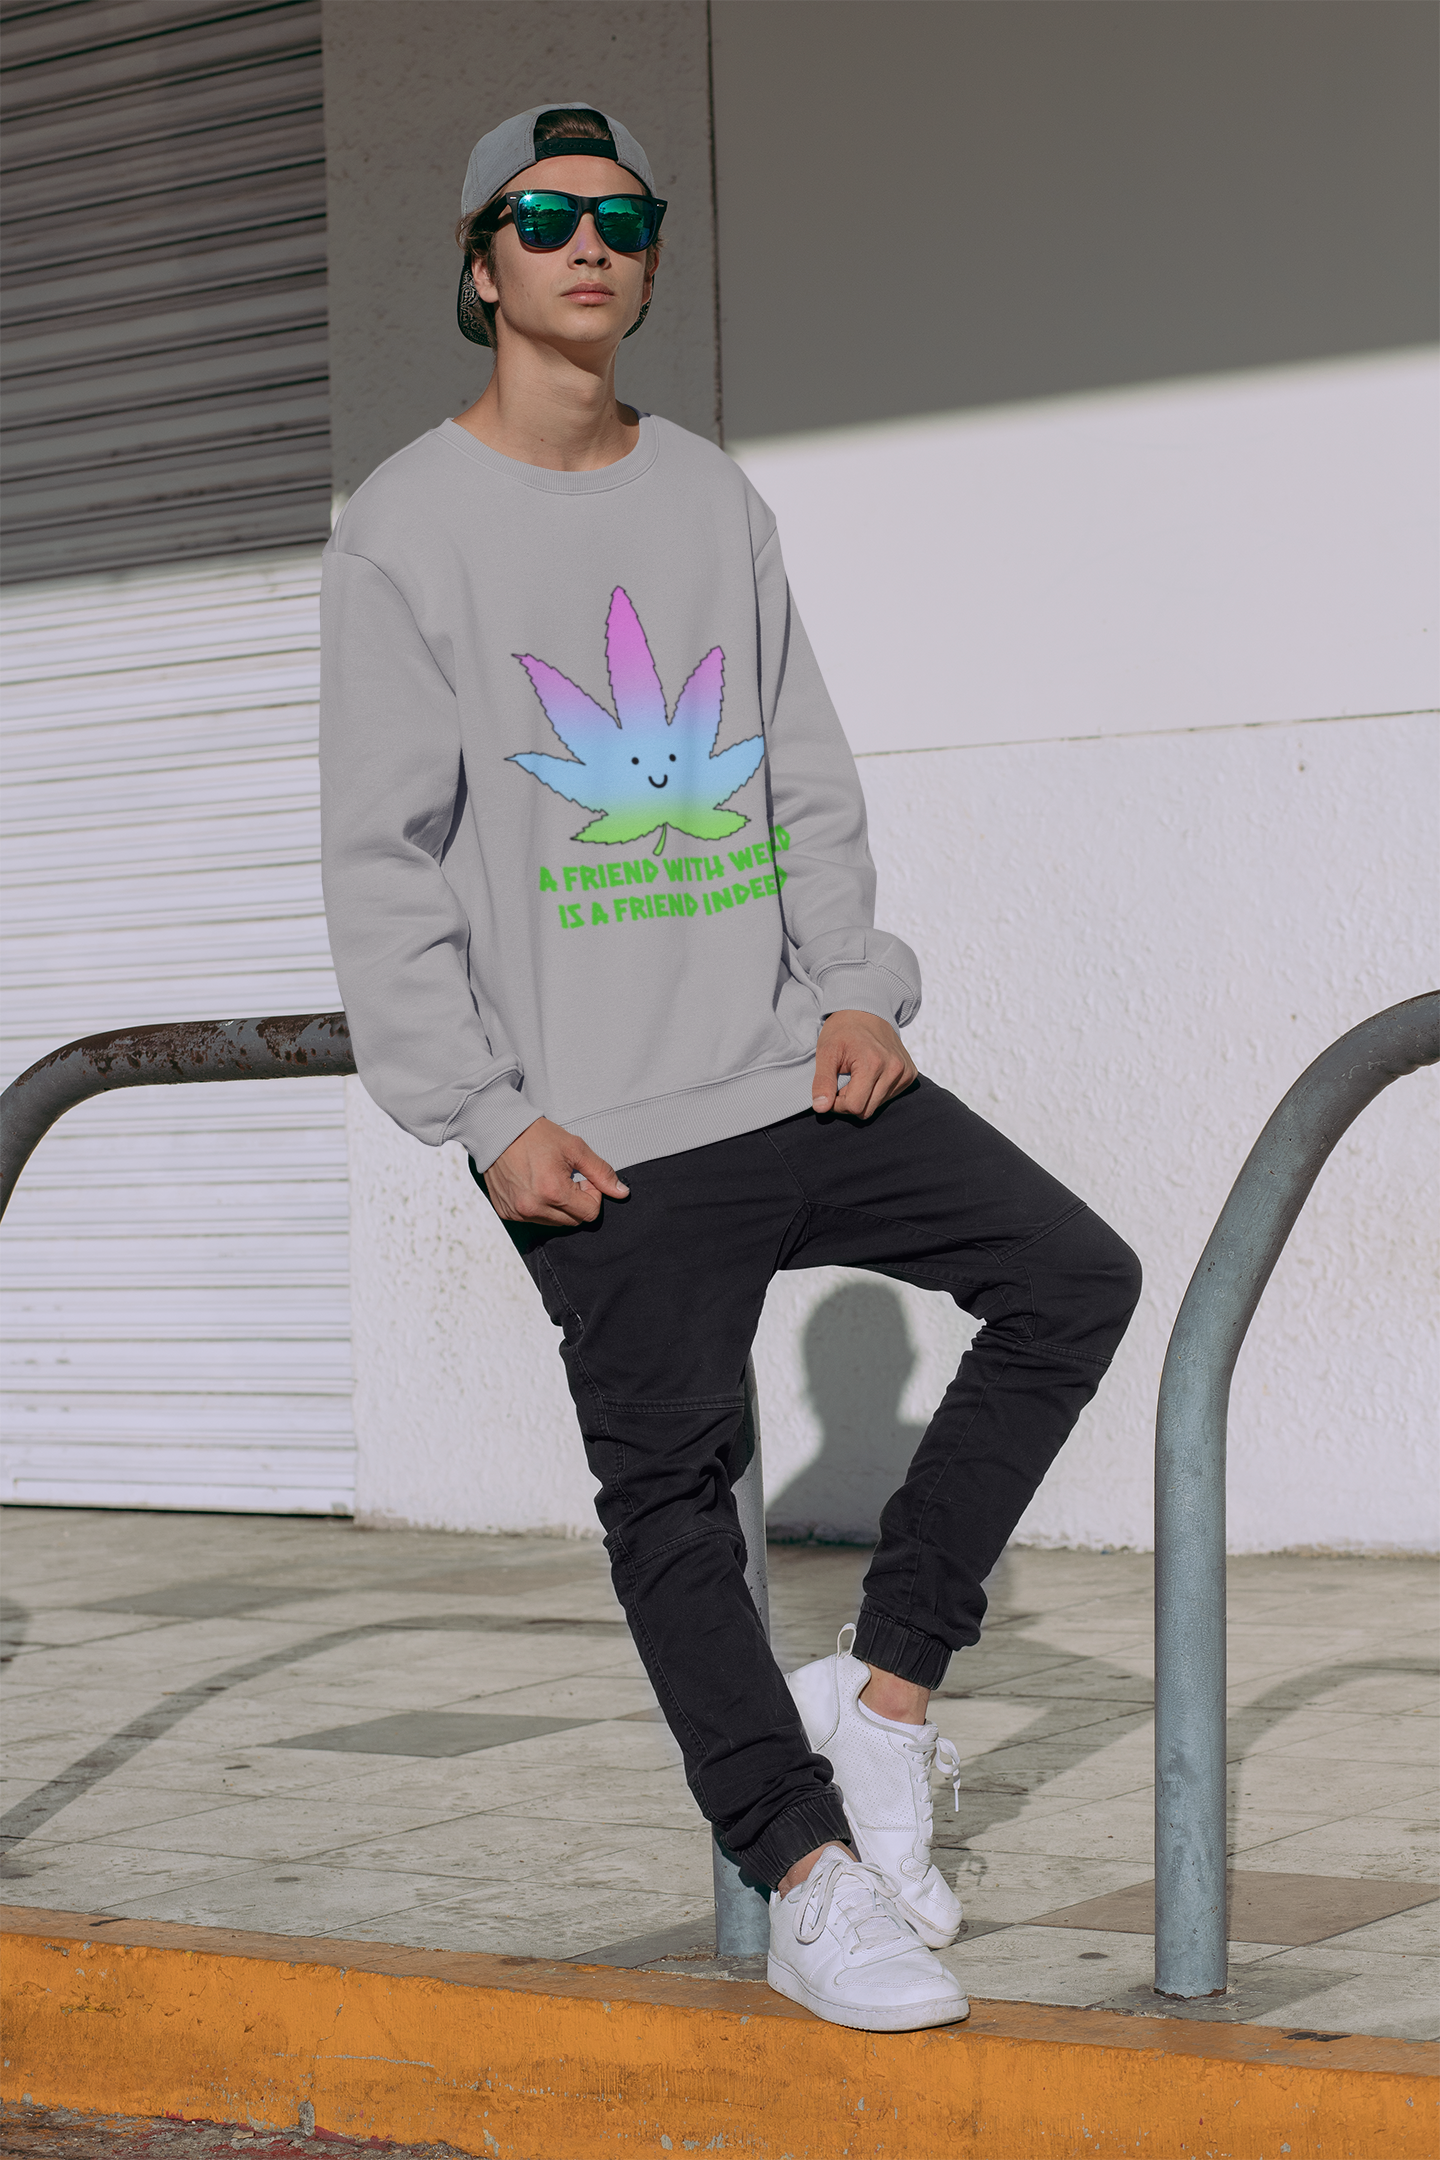 A Friend With Weed Mens Crew Neck Jumper